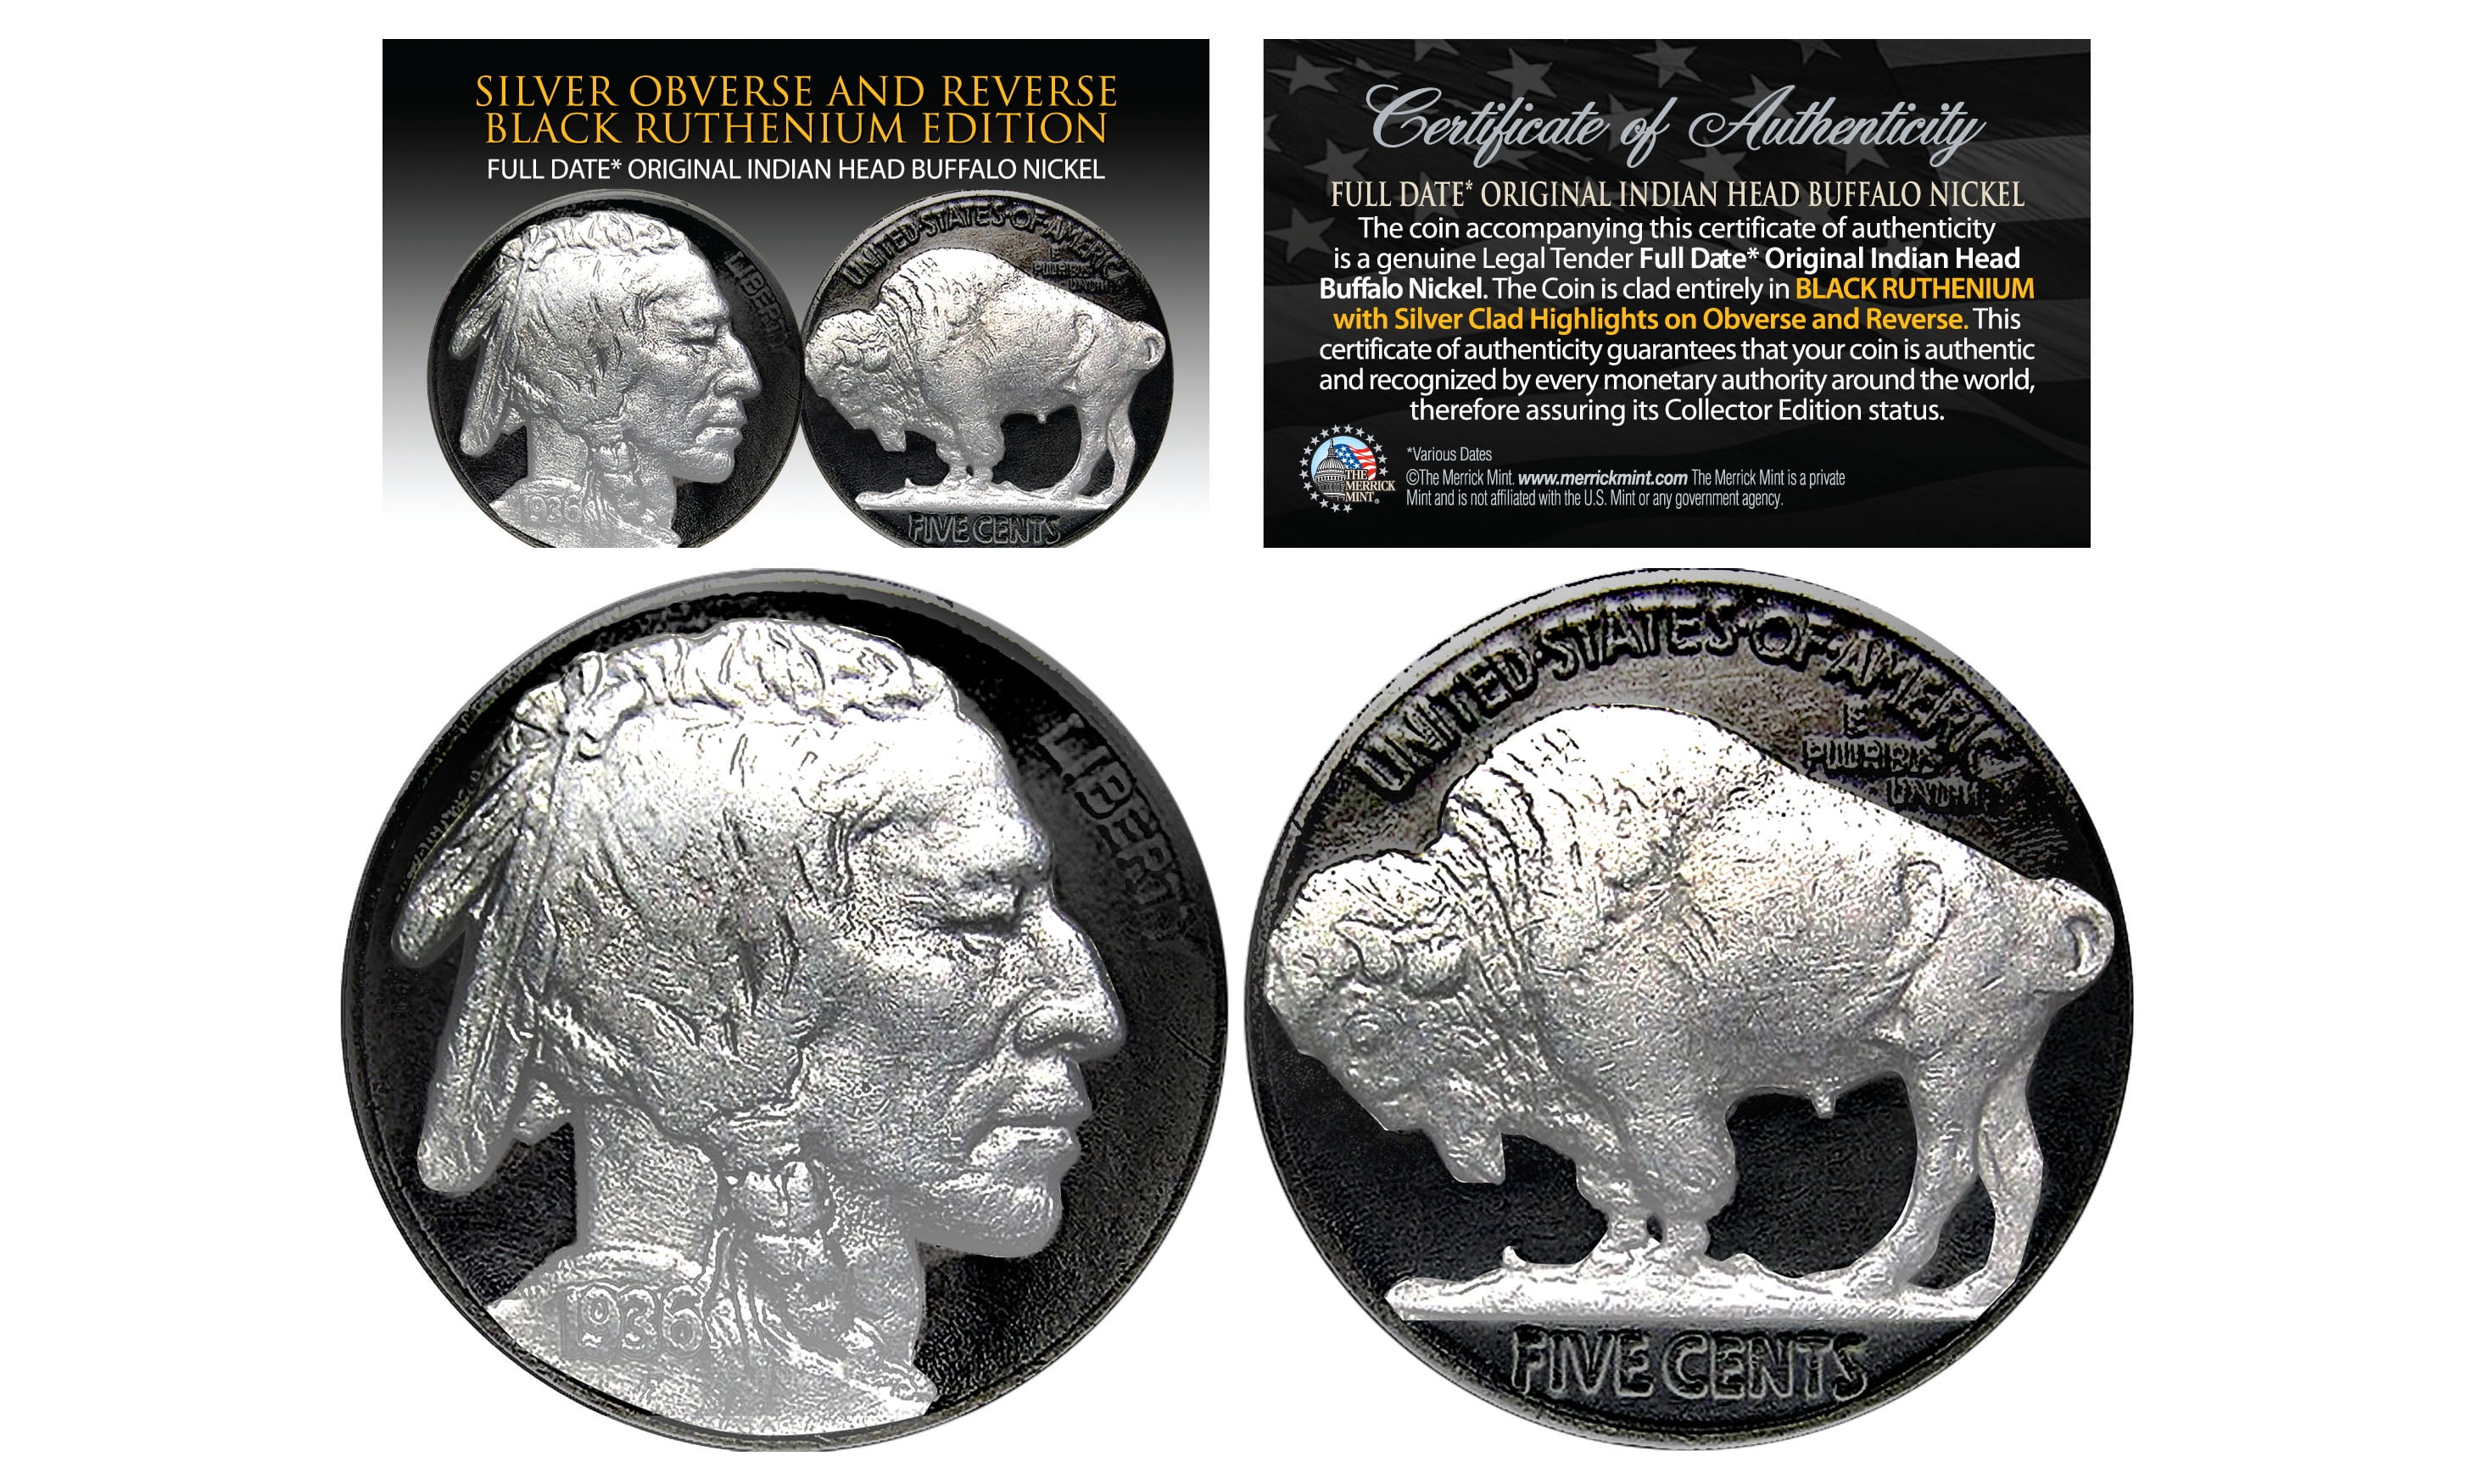 1930's 24K GOLD PLATED Indian Head Buffalo Nickel FULL DATE with BLACK RUTHENIUM 